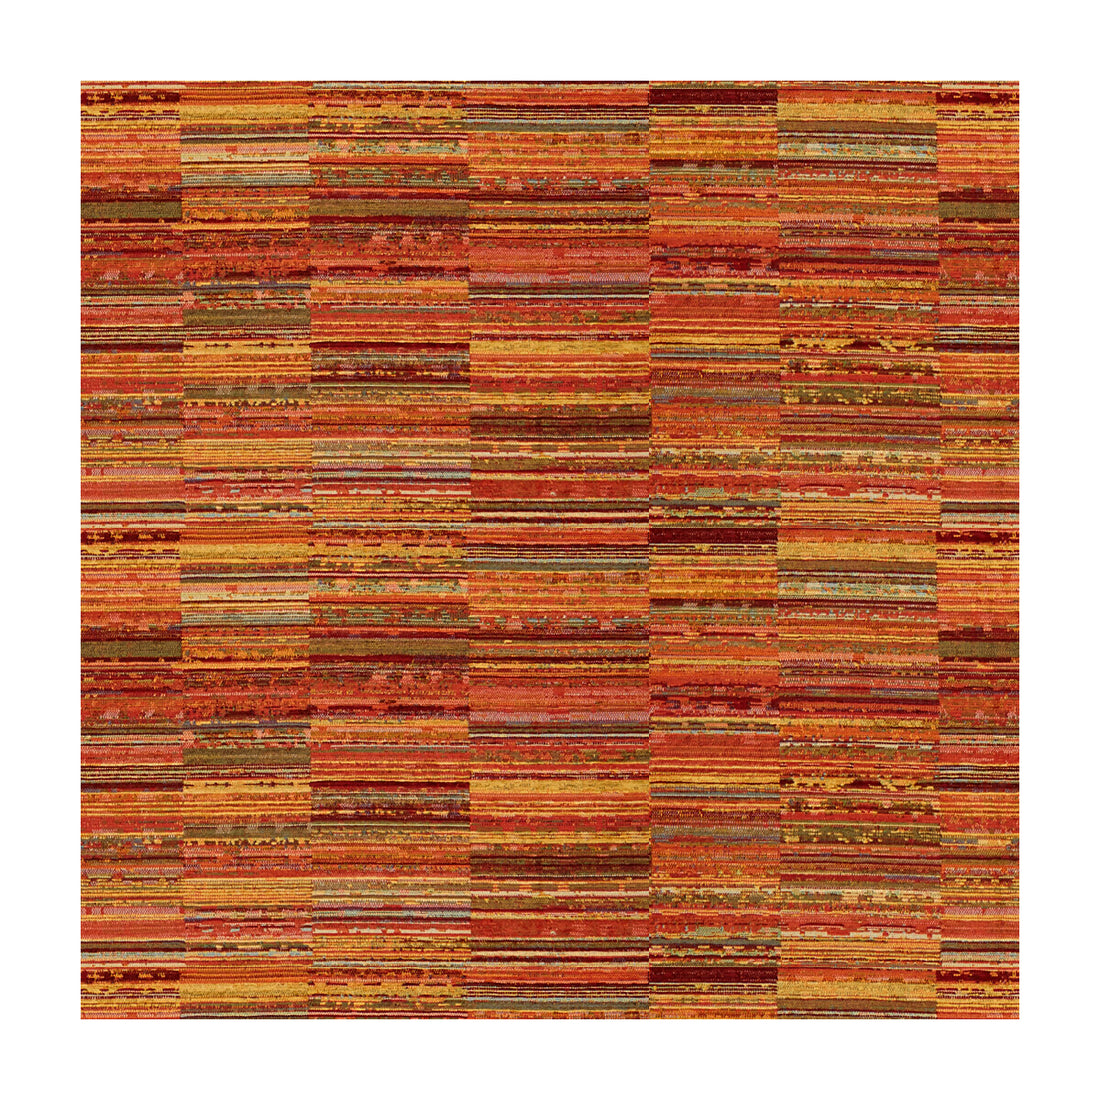 Rafiki fabric in sunset color - pattern 33867.912.0 - by Kravet Contract in the Tanzania J Banks collection